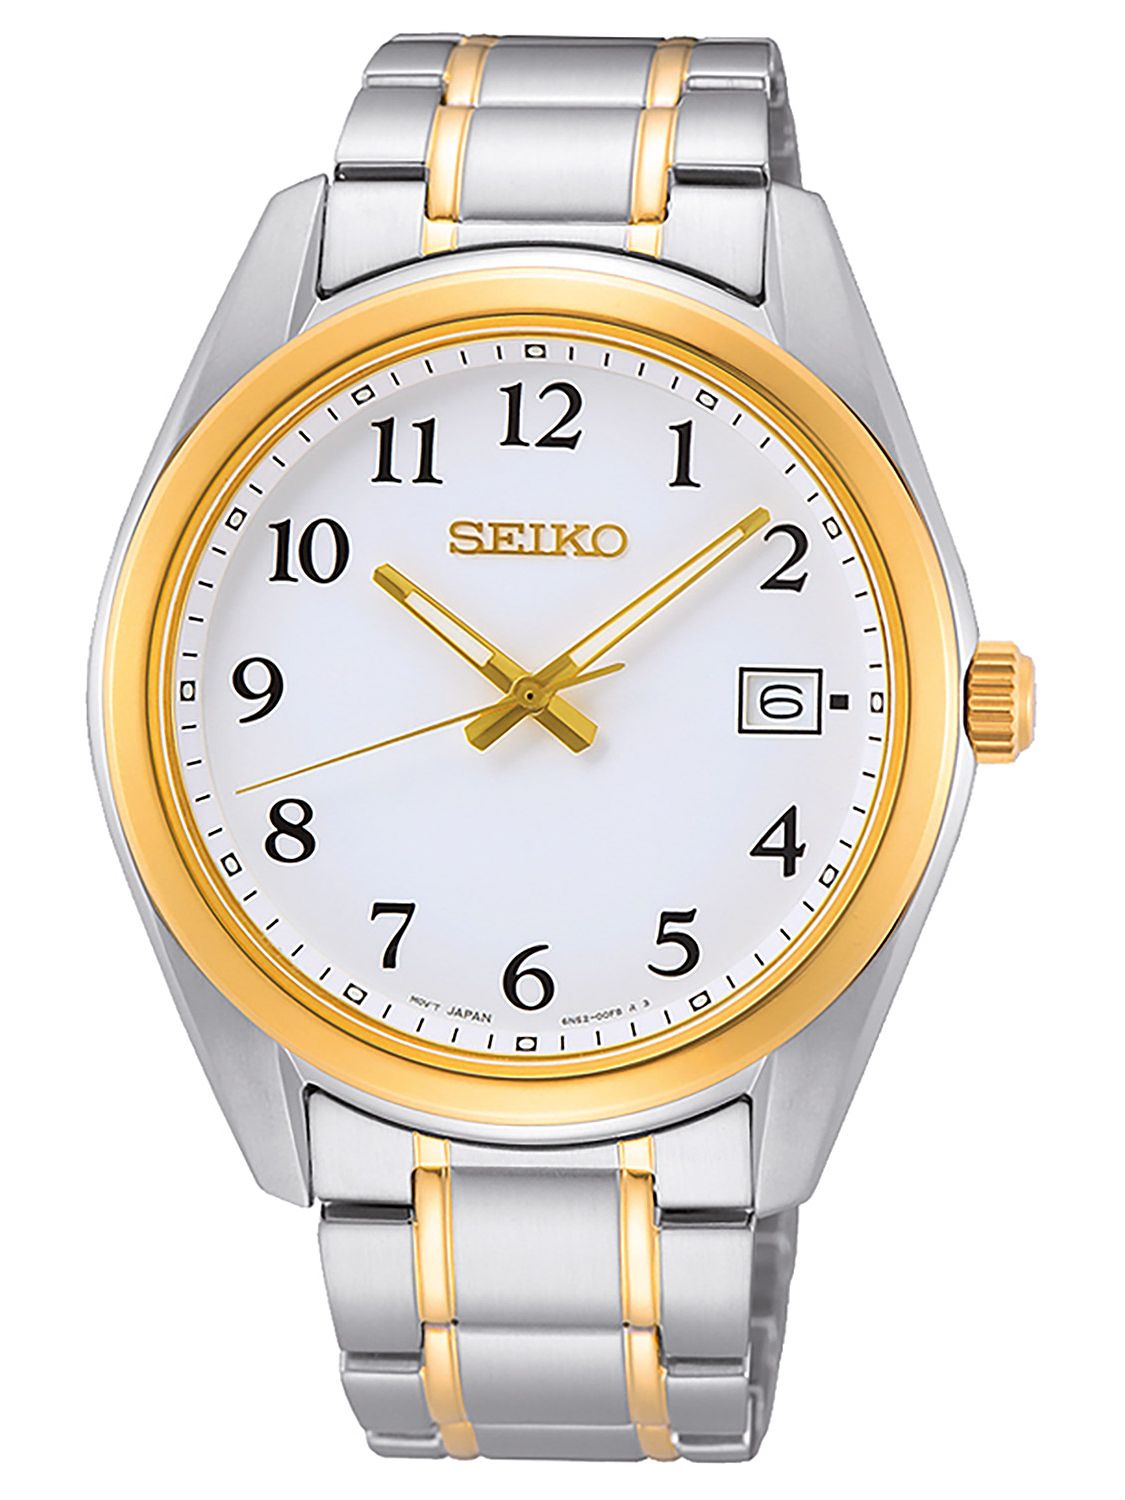 Seiko SUR460P1 Men's Watch with Sapphire Crystal Two-Colour